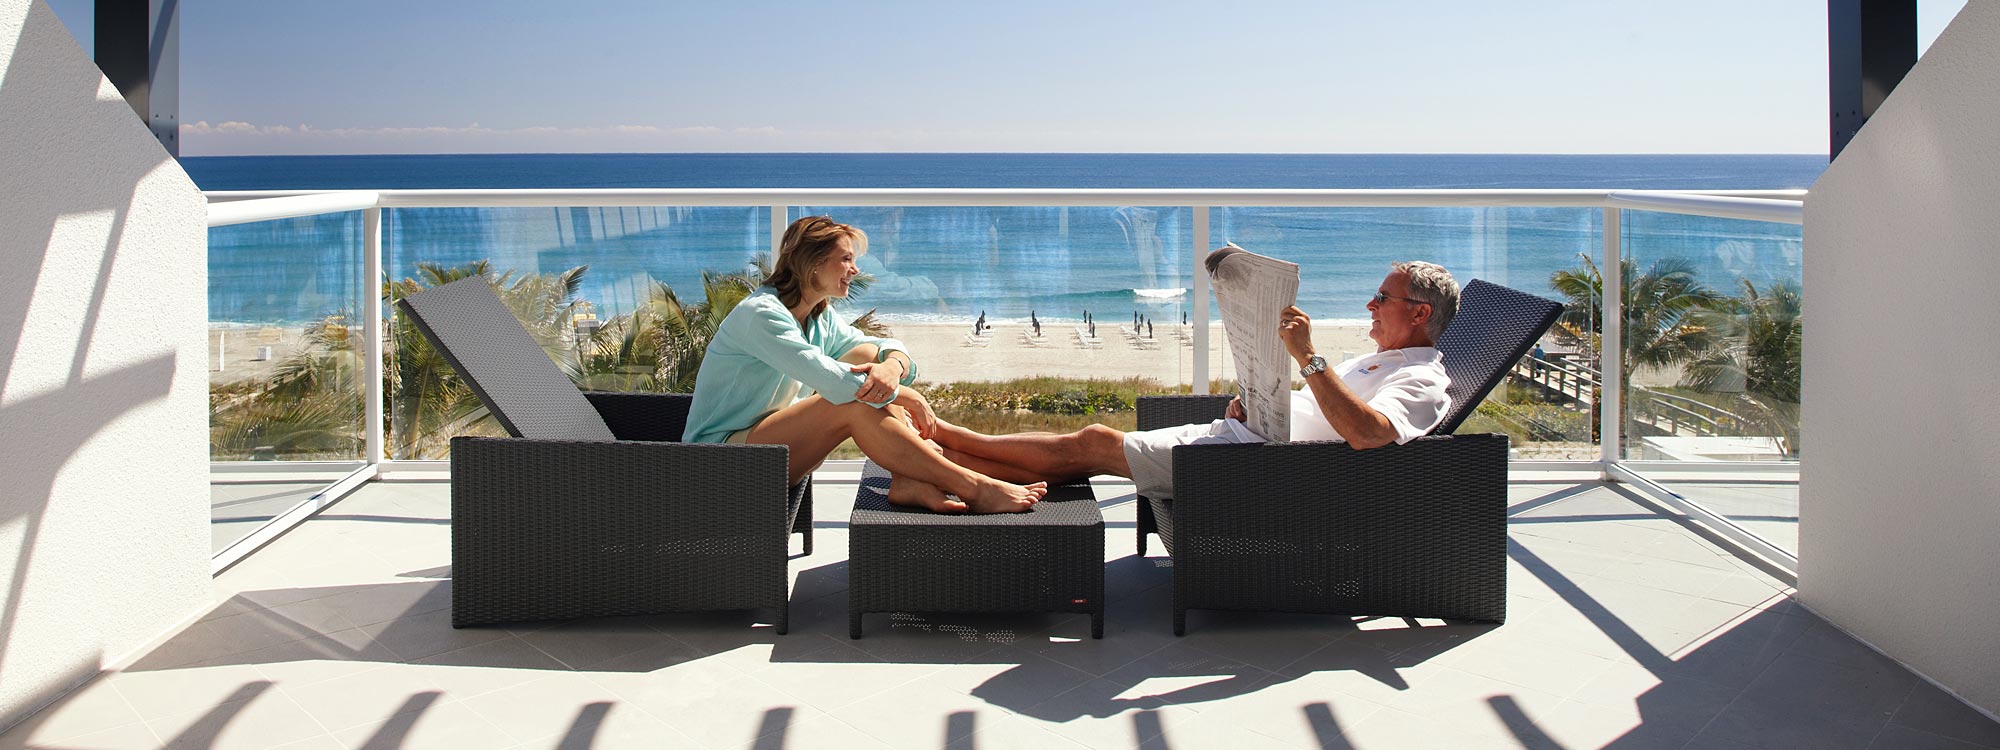 Image of couple relaxing and chatting on SOME modern outdoor furniture at Boca Beach Club USA